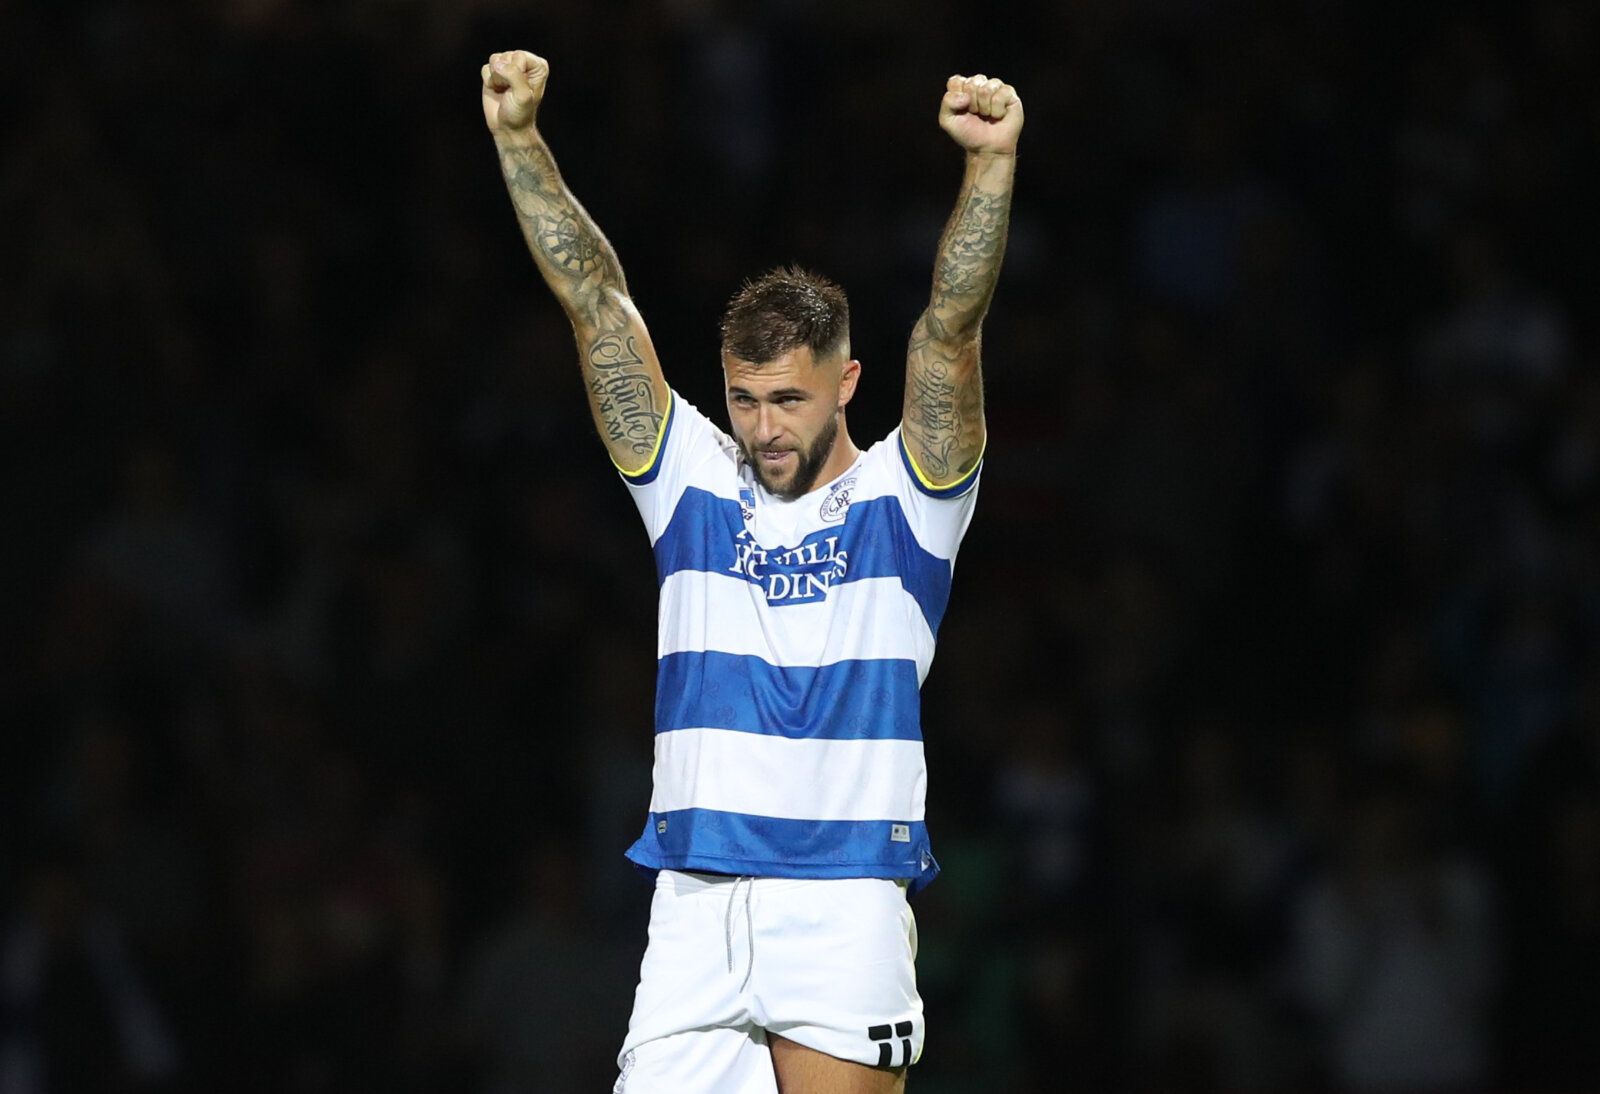 Soccer Football - Carabao Cup - Third Round - Queens Park Rangers v Everton - Loftus Road, London, Britain - September 21, 2021  Queens Park Rangers' Charlie Austin celebrates during the penalty shoot-out Action Images via Reuters/Peter Cziborra EDITORIAL USE ONLY. No use with unauthorized audio, video, data, fixture lists, club/league logos or 'live' services. Online in-match use limited to 75 images, no video emulation. No use in betting, games or single club /league/player publications.  Plea